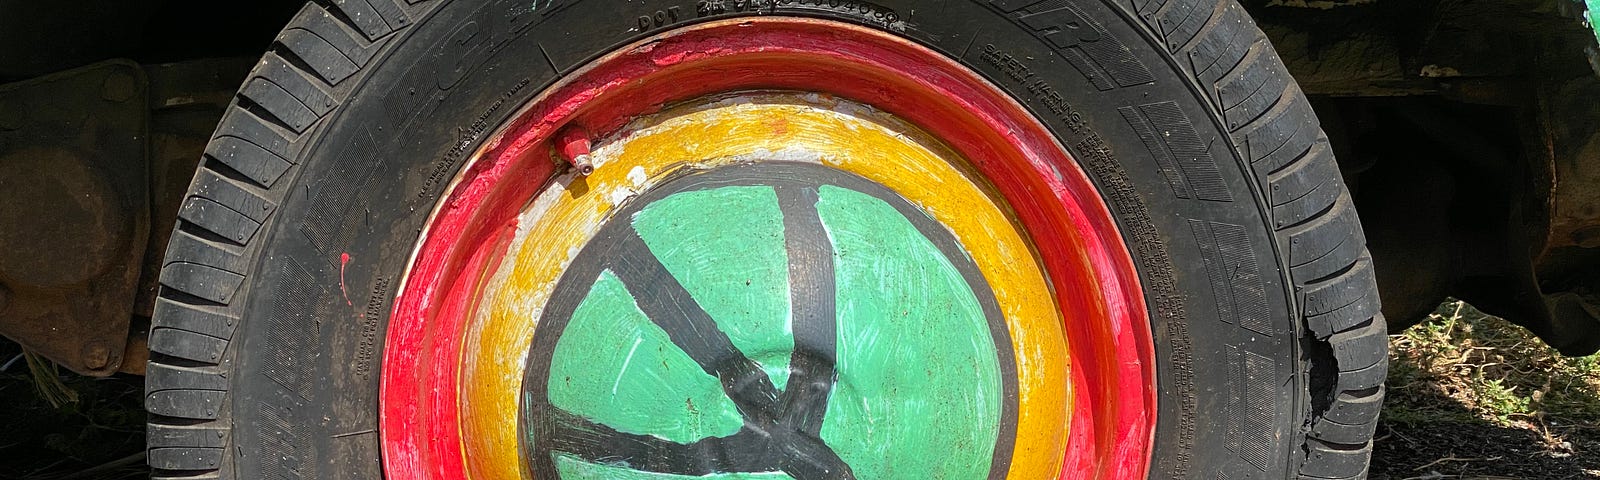 close up of flat tire with a peace sign painted on the hub cap